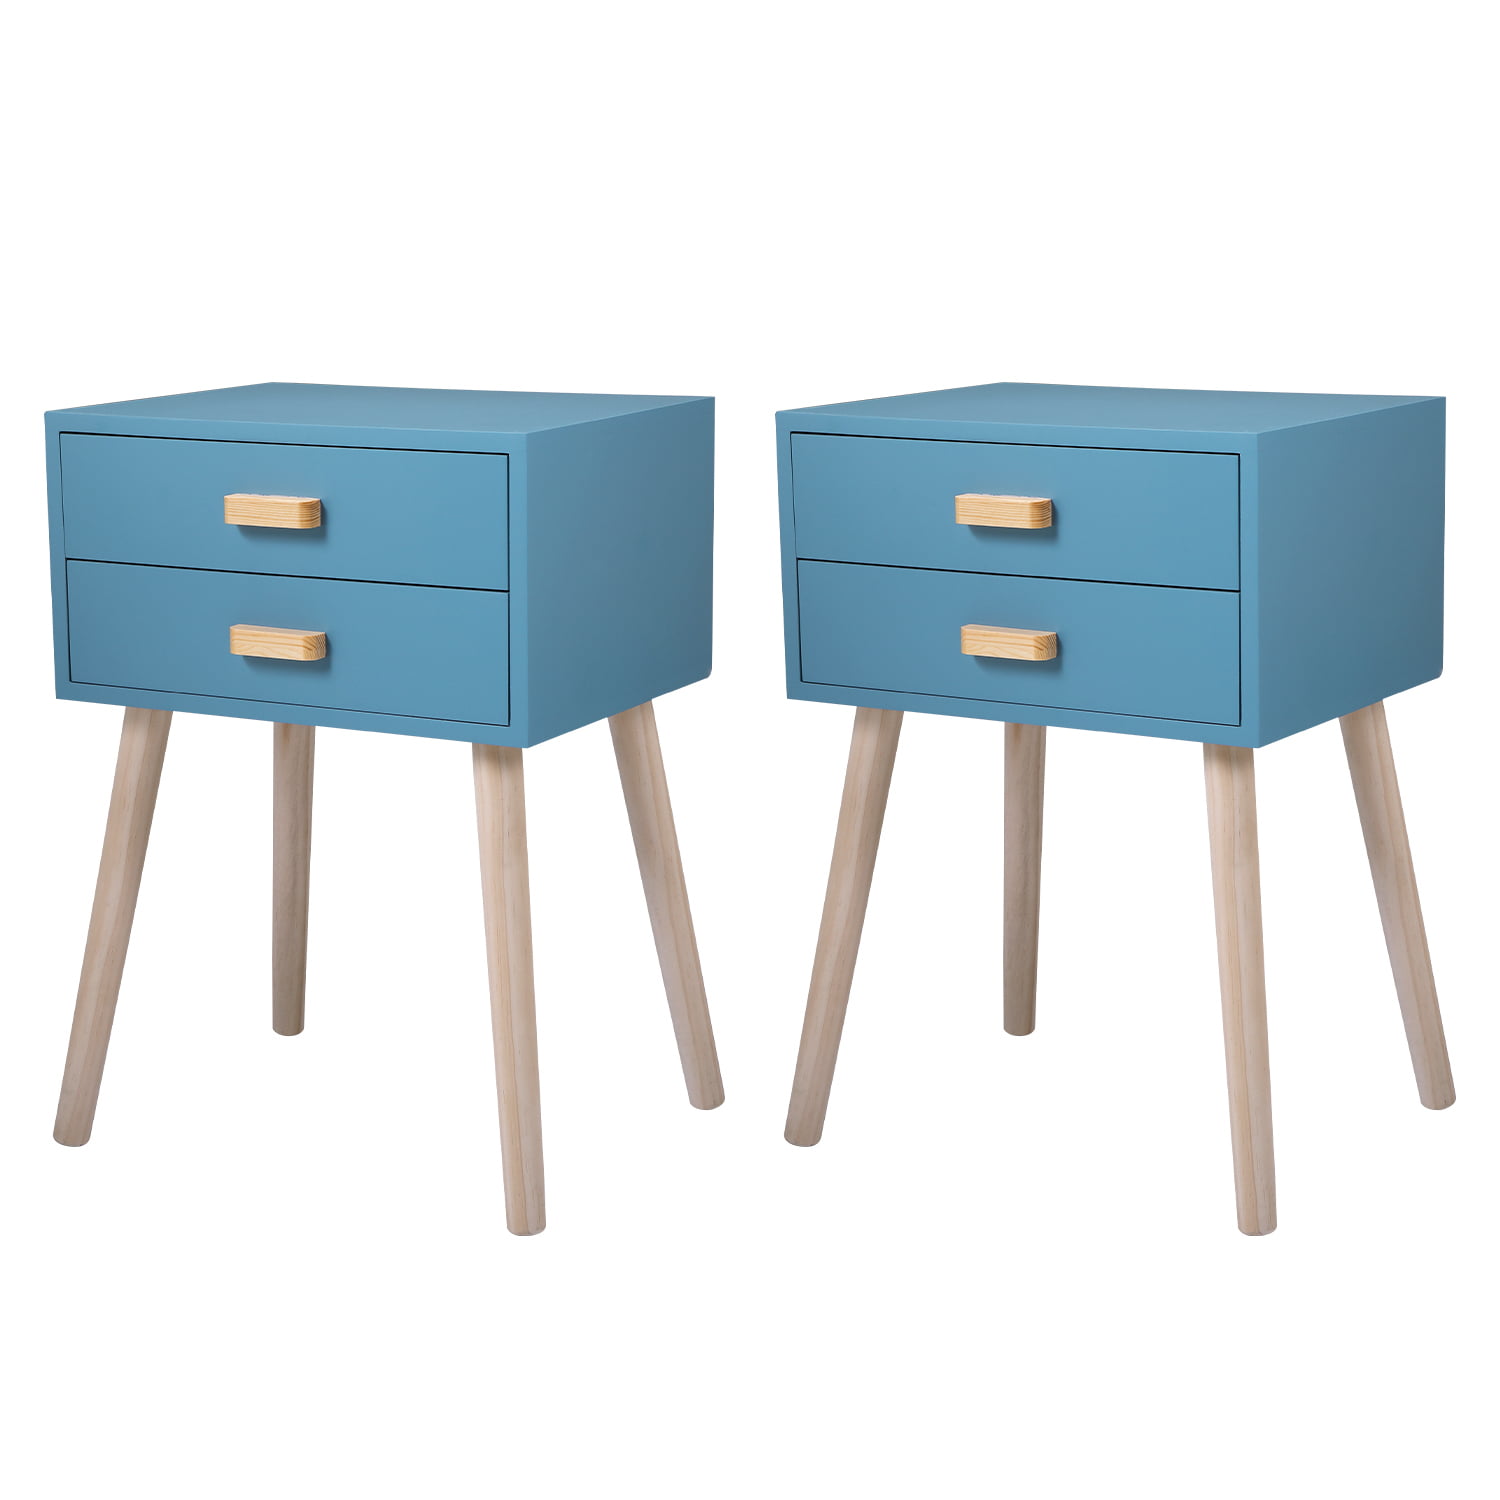 JAXPETY Mid Century Modern Nightstand Set of 2, 2 Drawers Wood Bedside End Table for Bedroom Living Room, 24.8" H, Light Blue